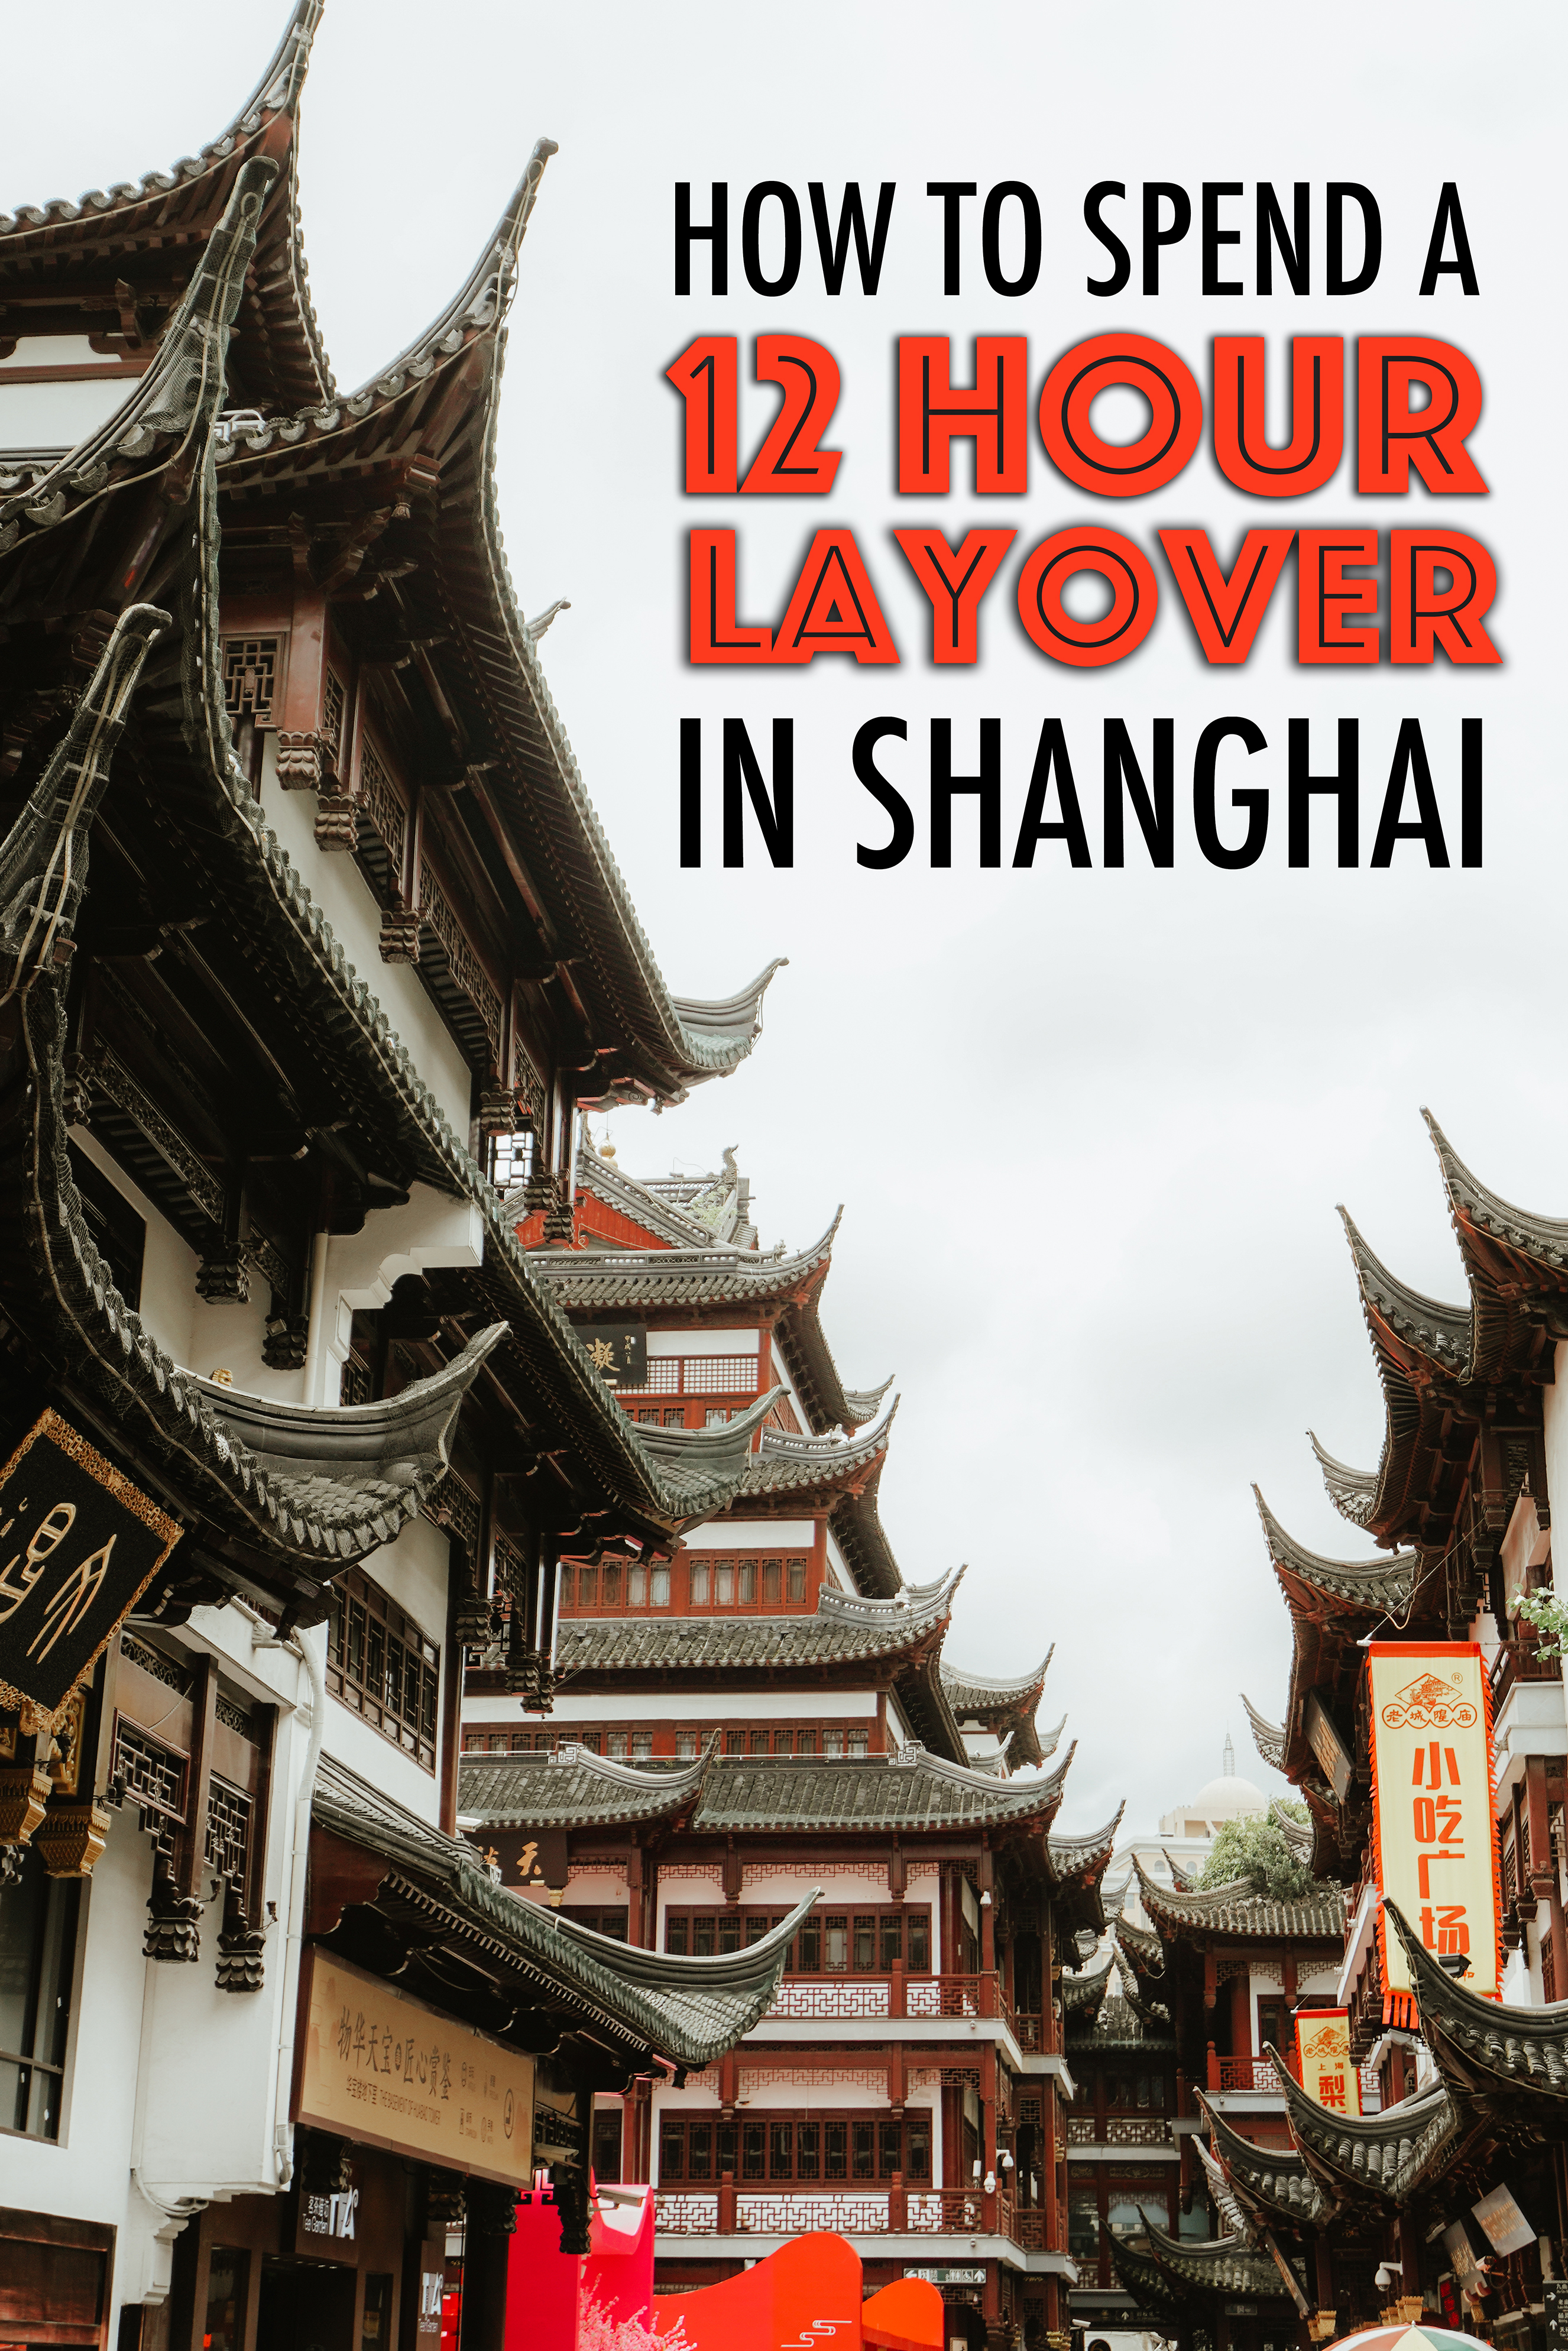 How to spend a 12 hour layover in Shanghai, China